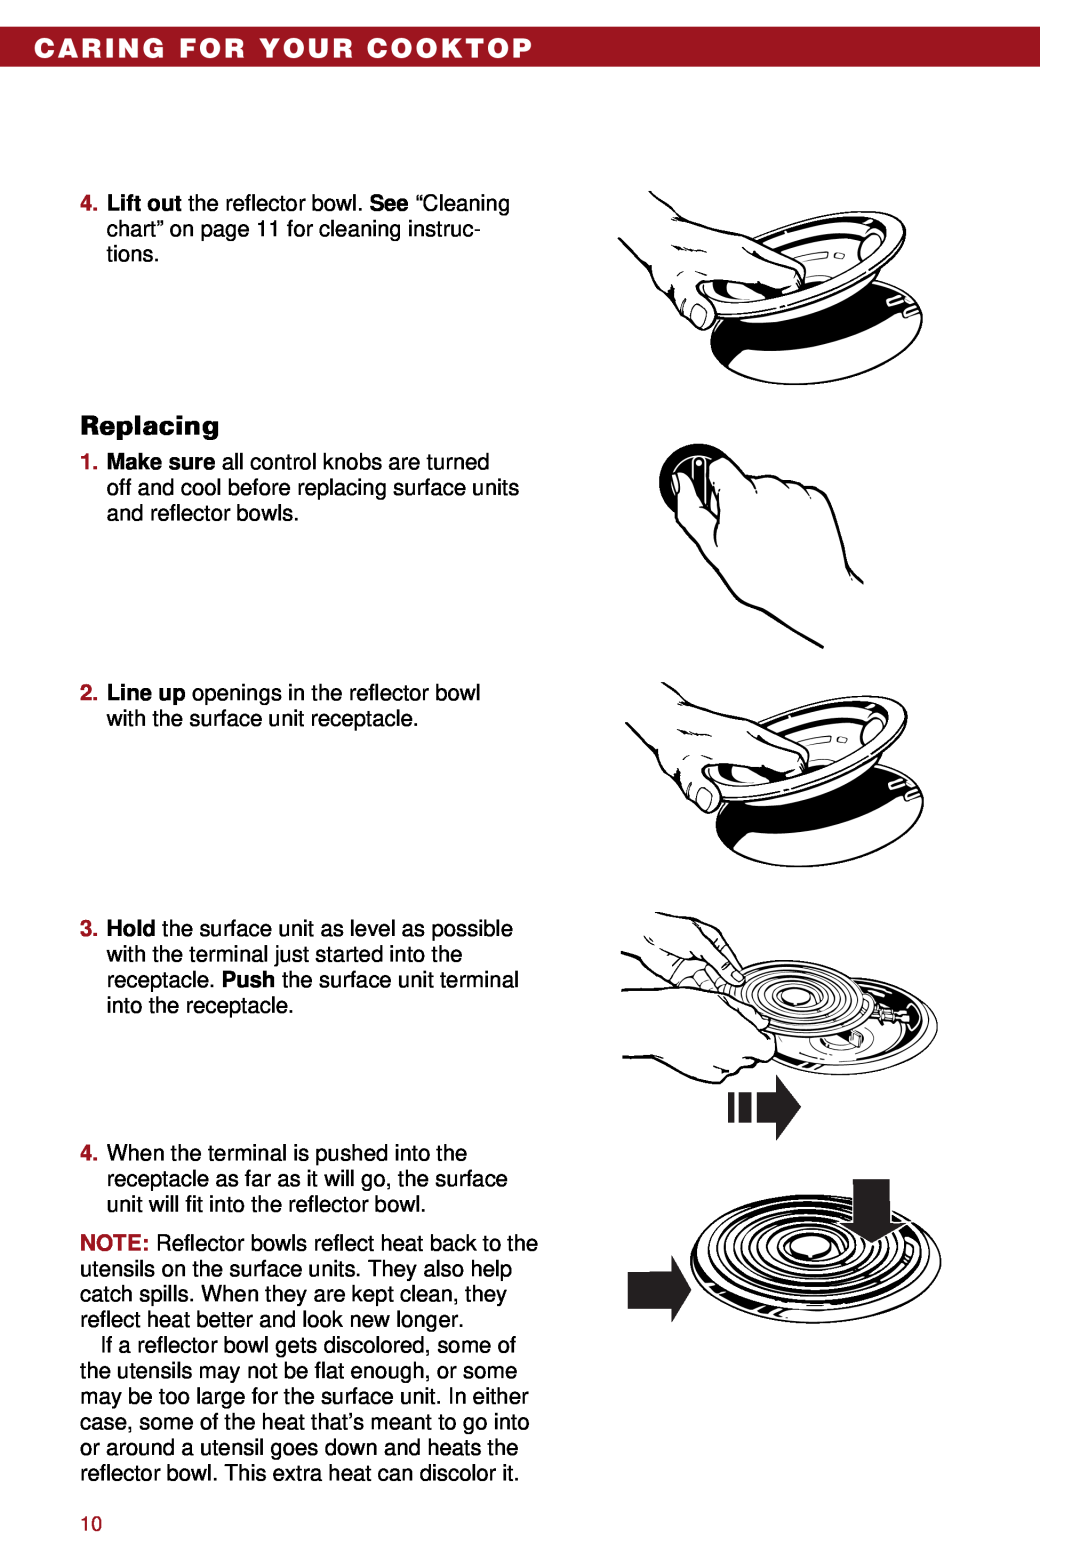 Whirlpool RC8110XA, RC8100XA important safety instructions Caring For Your Cooktop, Replacing 